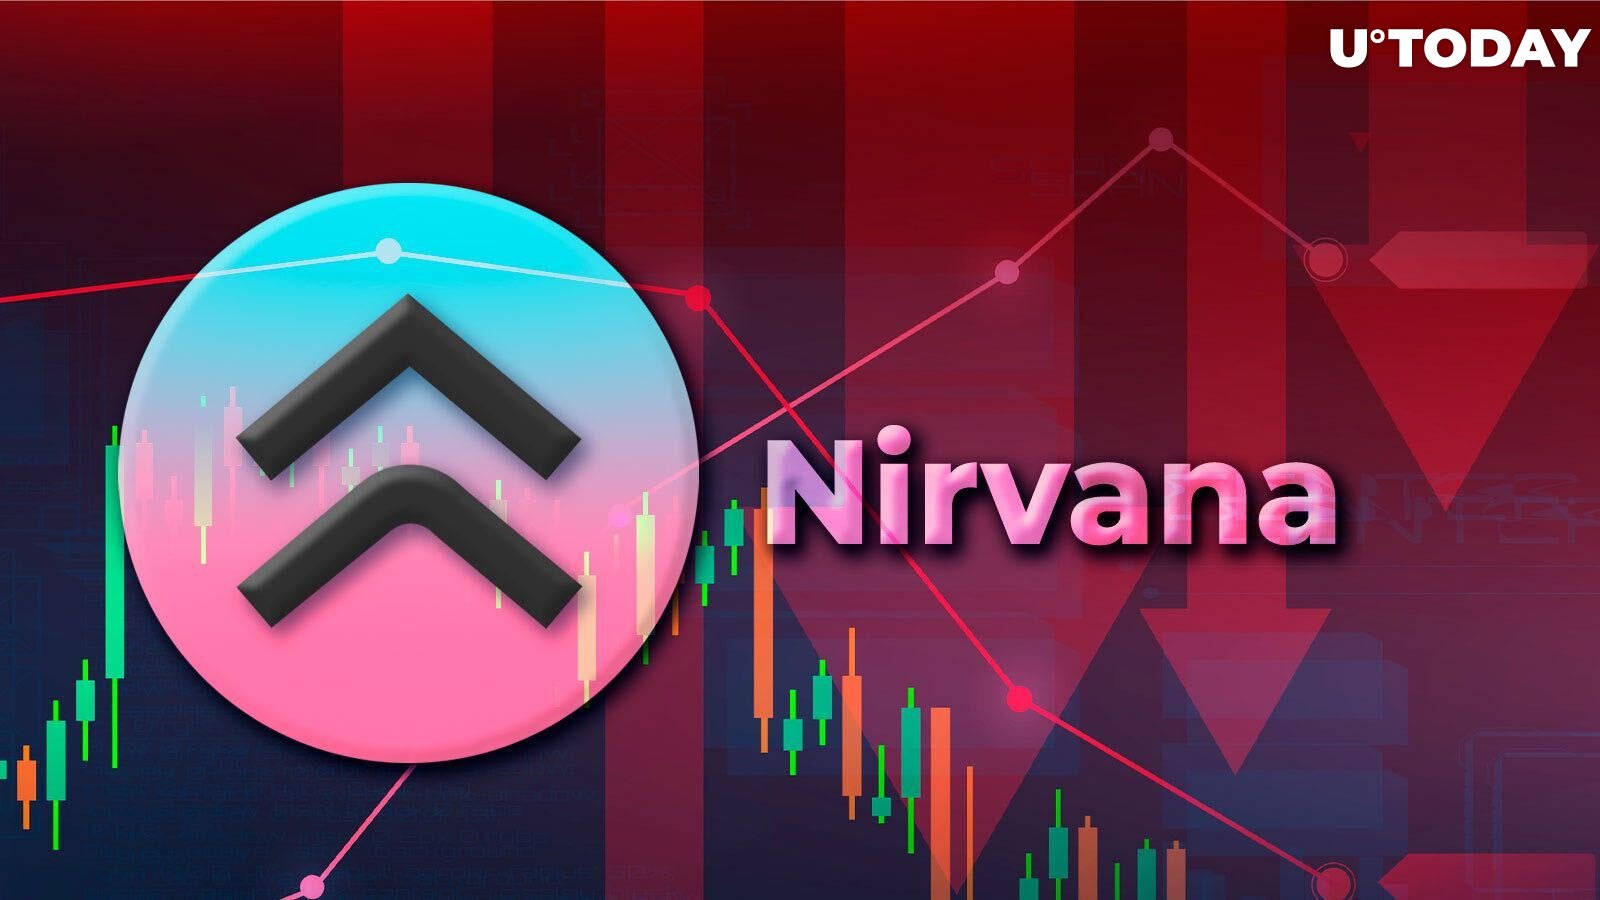 Solana-based Stablecoin NIRV Is Attacked, Rate Collapsed 90%